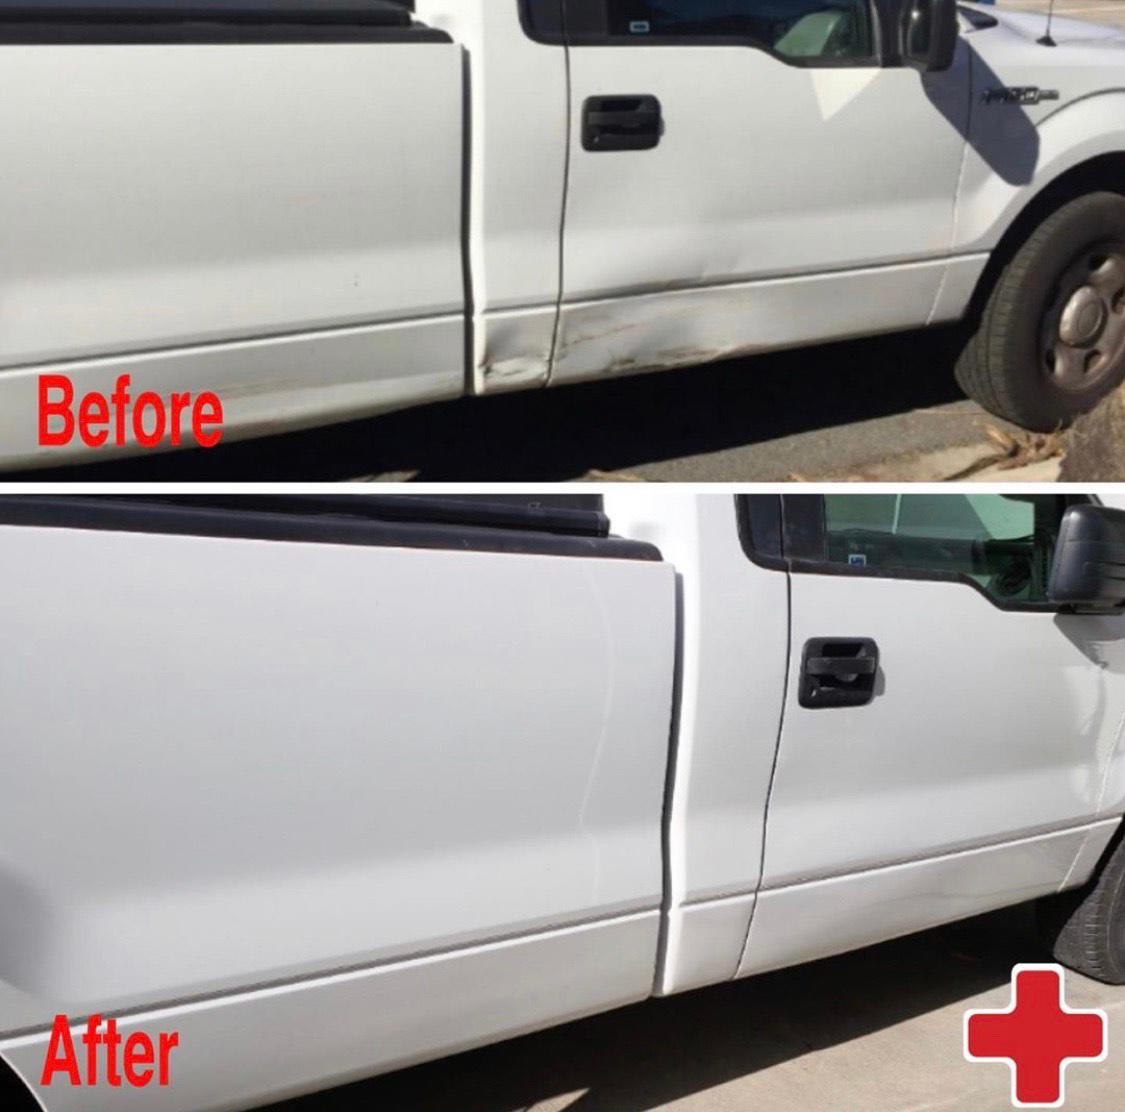 Carbulance Mobile Auto Body is your go-to destination for auto collision repair in San Diego, CA. Our experienced team is committed to restoring the integrity and aesthetics of your vehicle after a collision, providing reliable and efficient service when you need it most.